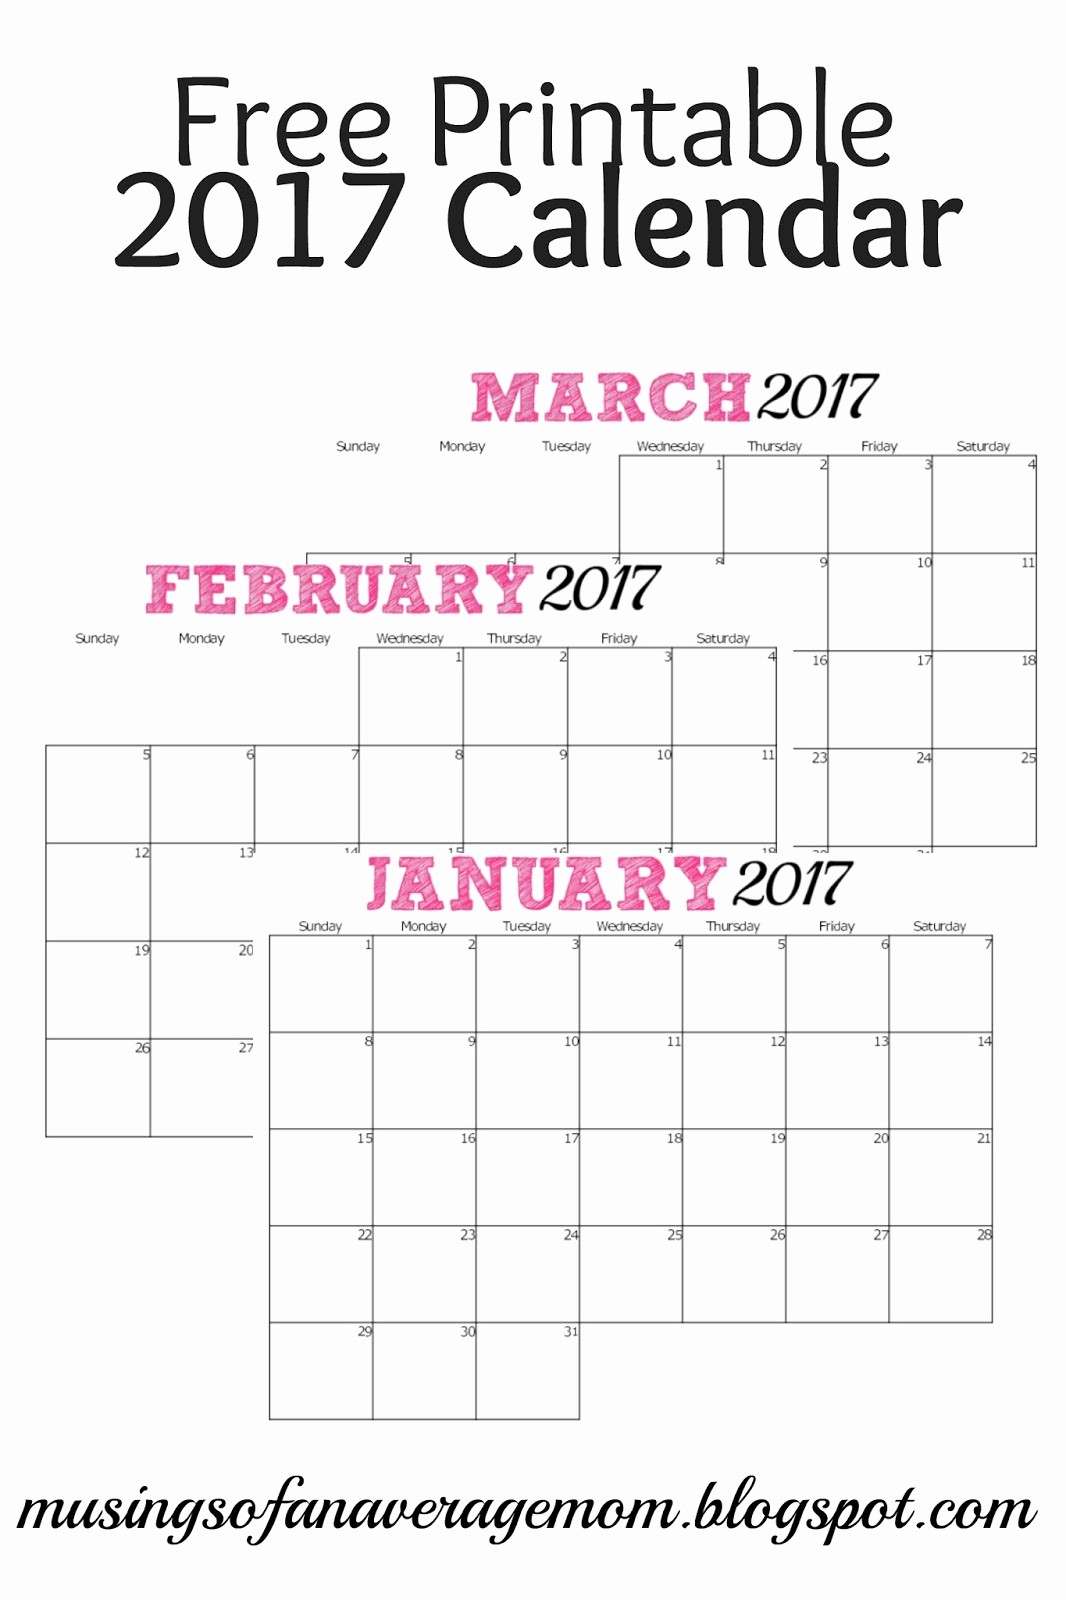 Monthly Calendar 2017 Printable Free Unique Musings Of An Average Mom 2017 Monthly Calendars